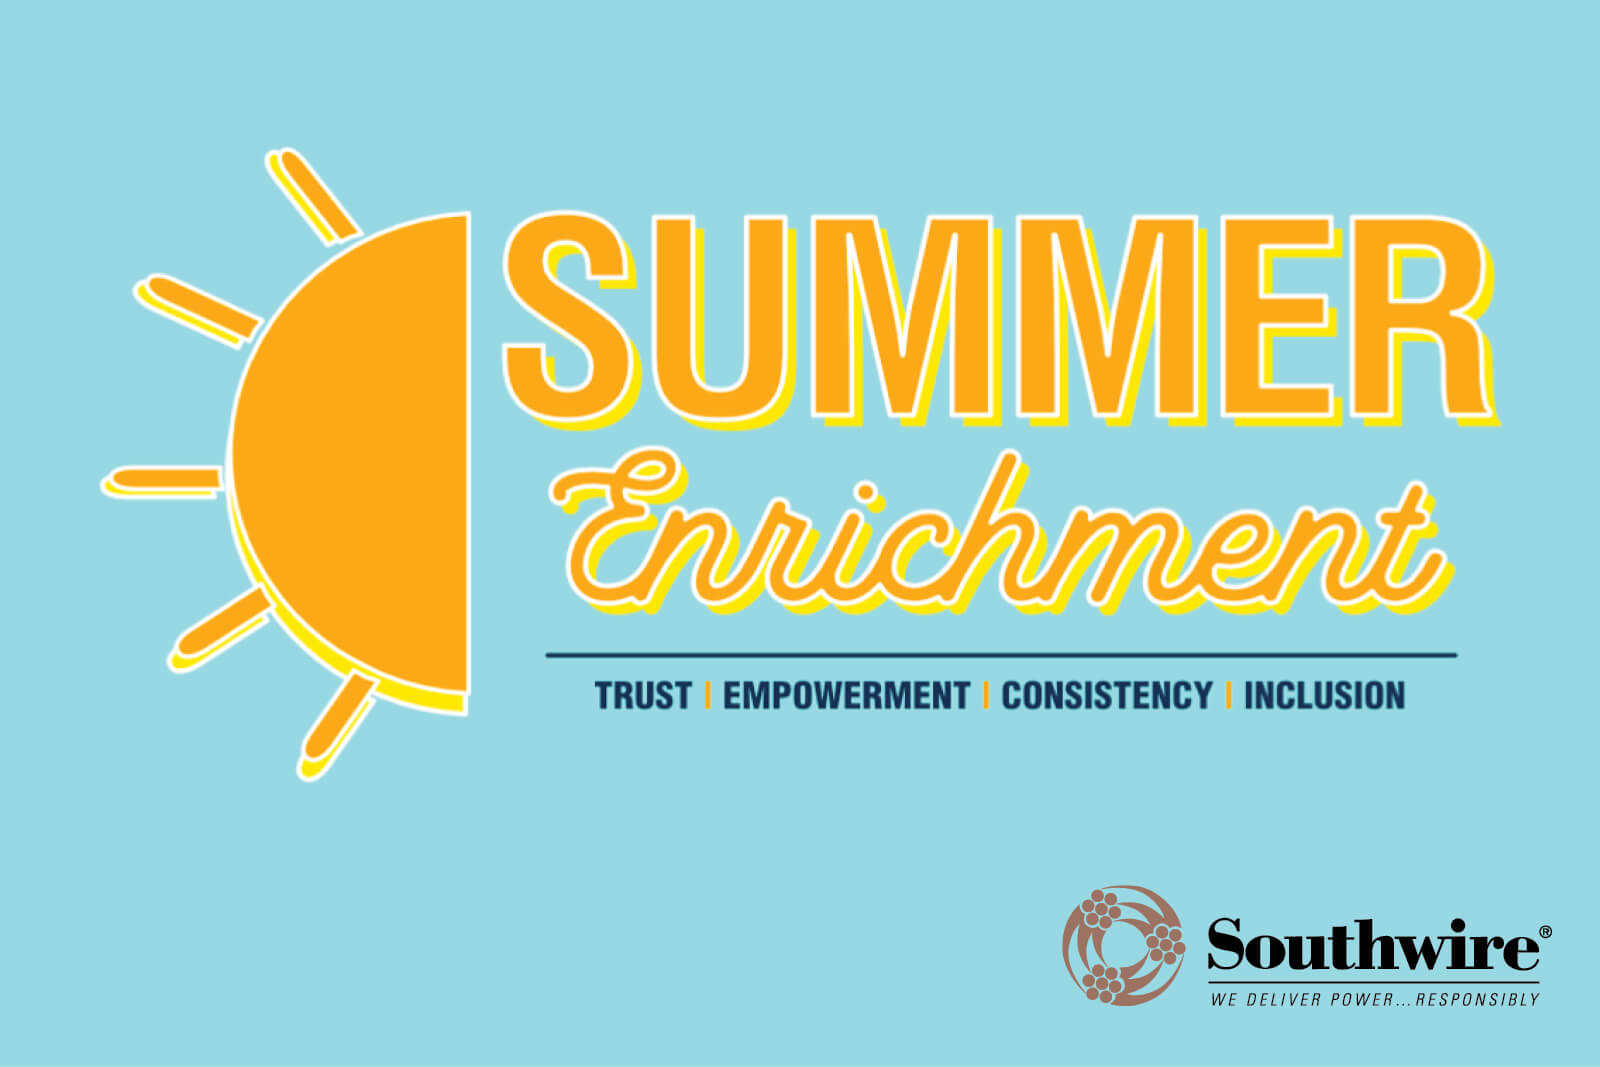 Southwire Employees Participate in Annual Summer Enrichment Series